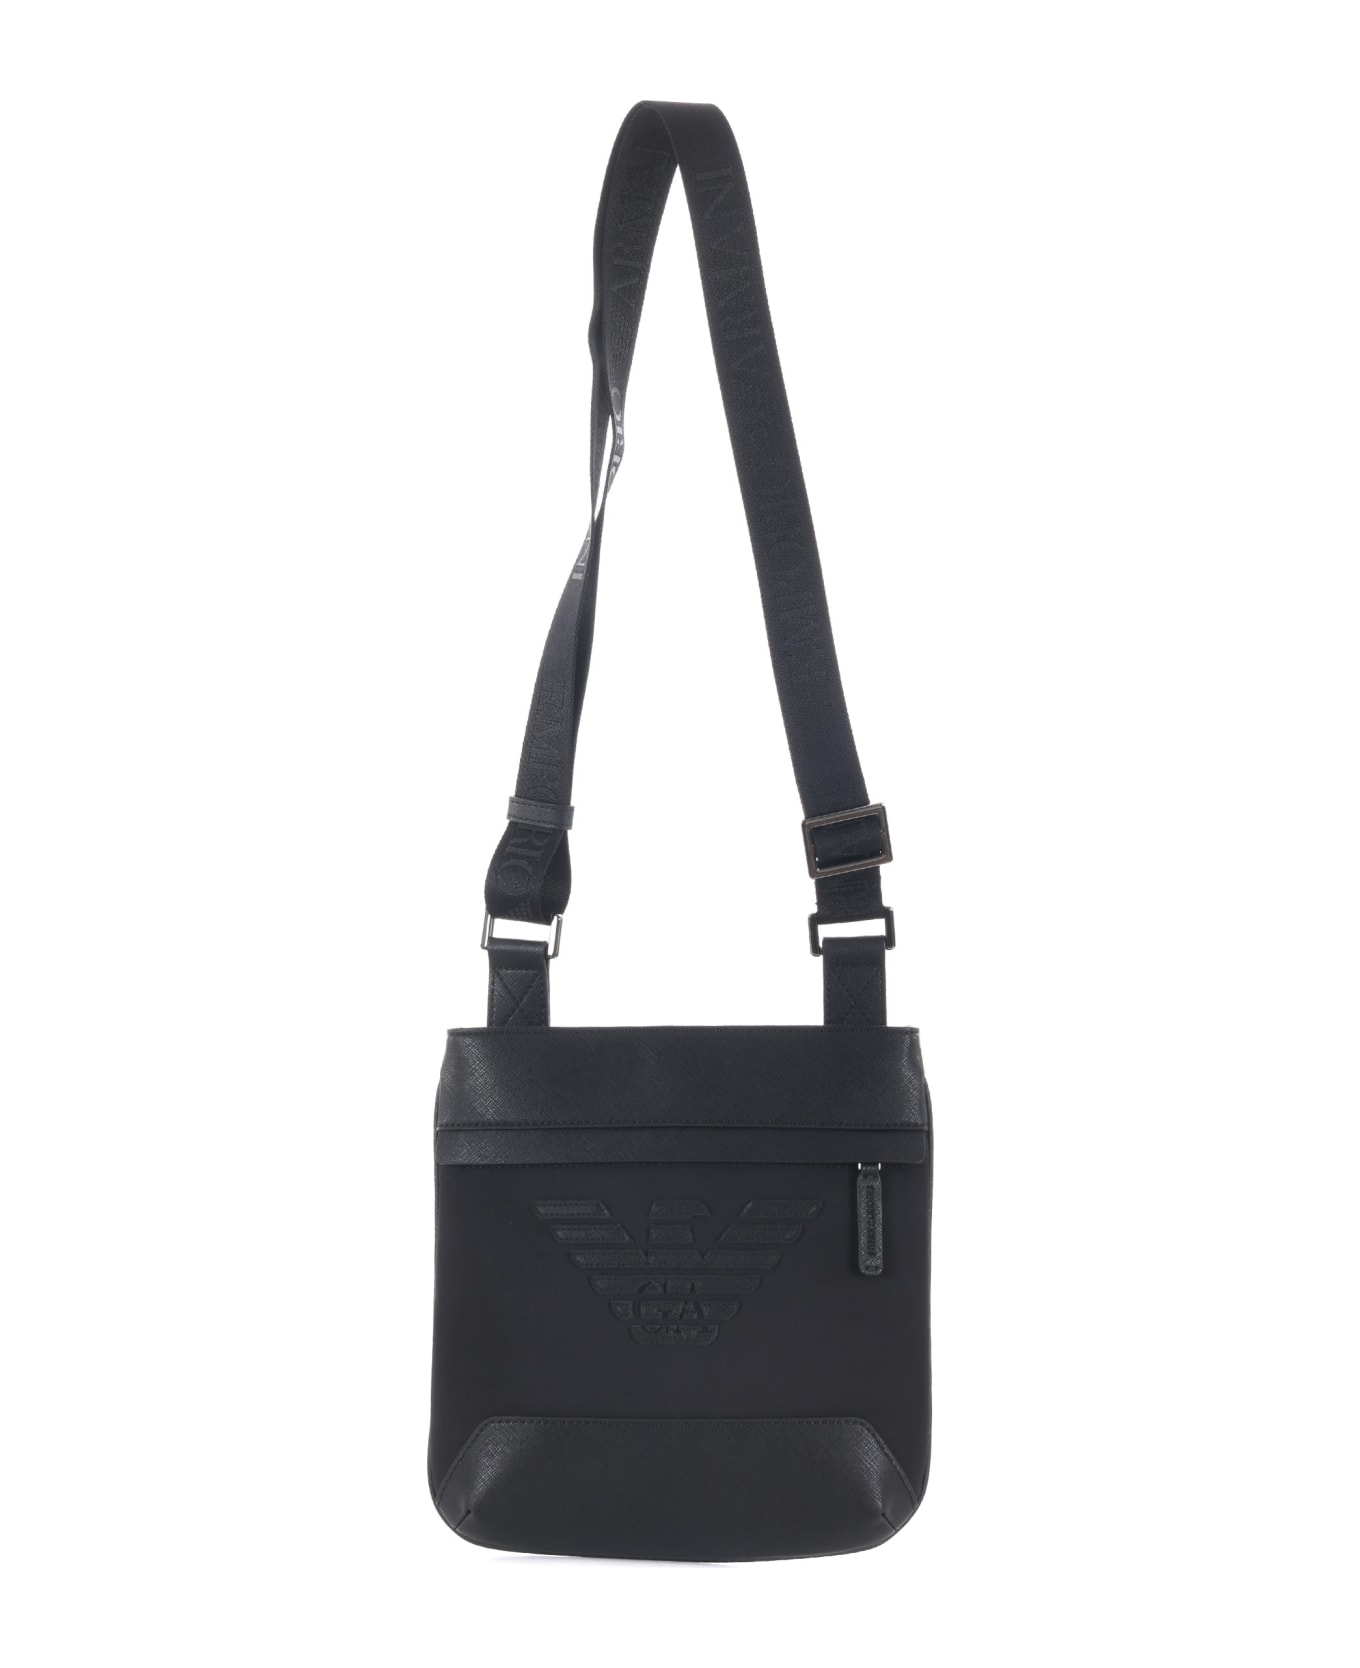 Emporio Armani Shoulder Bag From The 'sustainable' Collection - Black